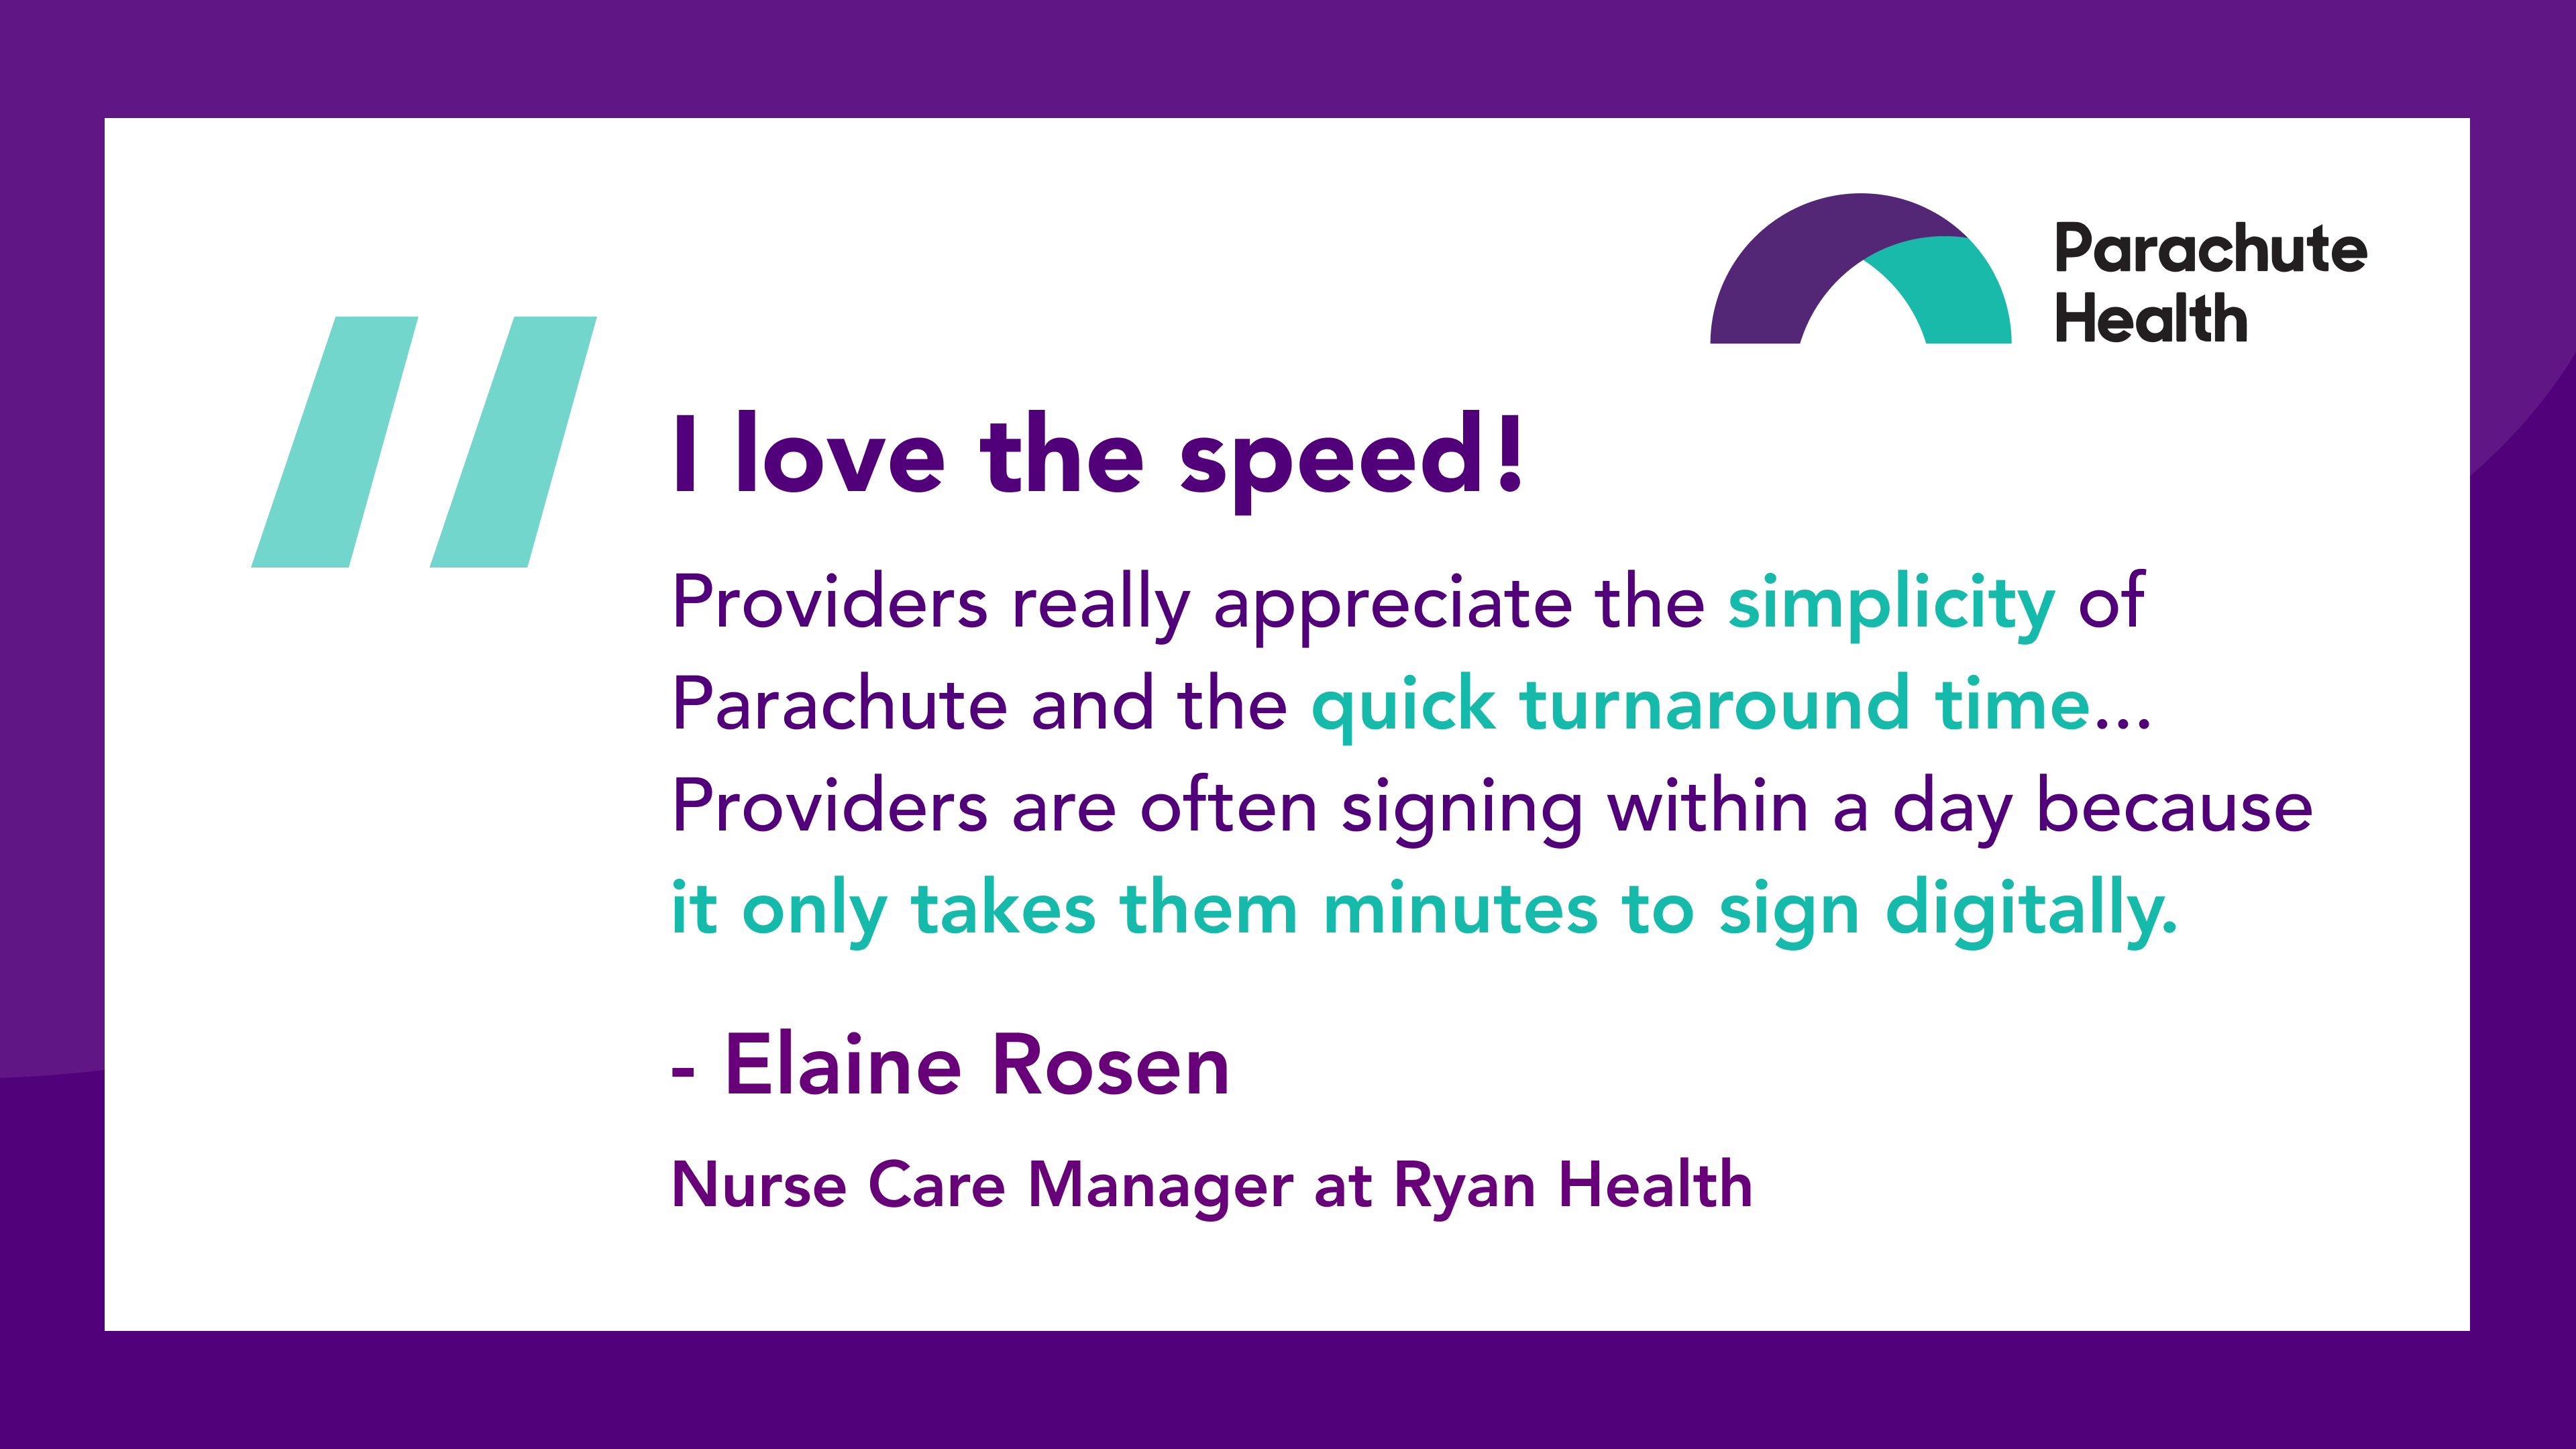 Now that Elaine is using the Parachute Platform for arranging DME and home health services, she has saved significant time with increased ordering speed and clear visibility into order status and acceptance.